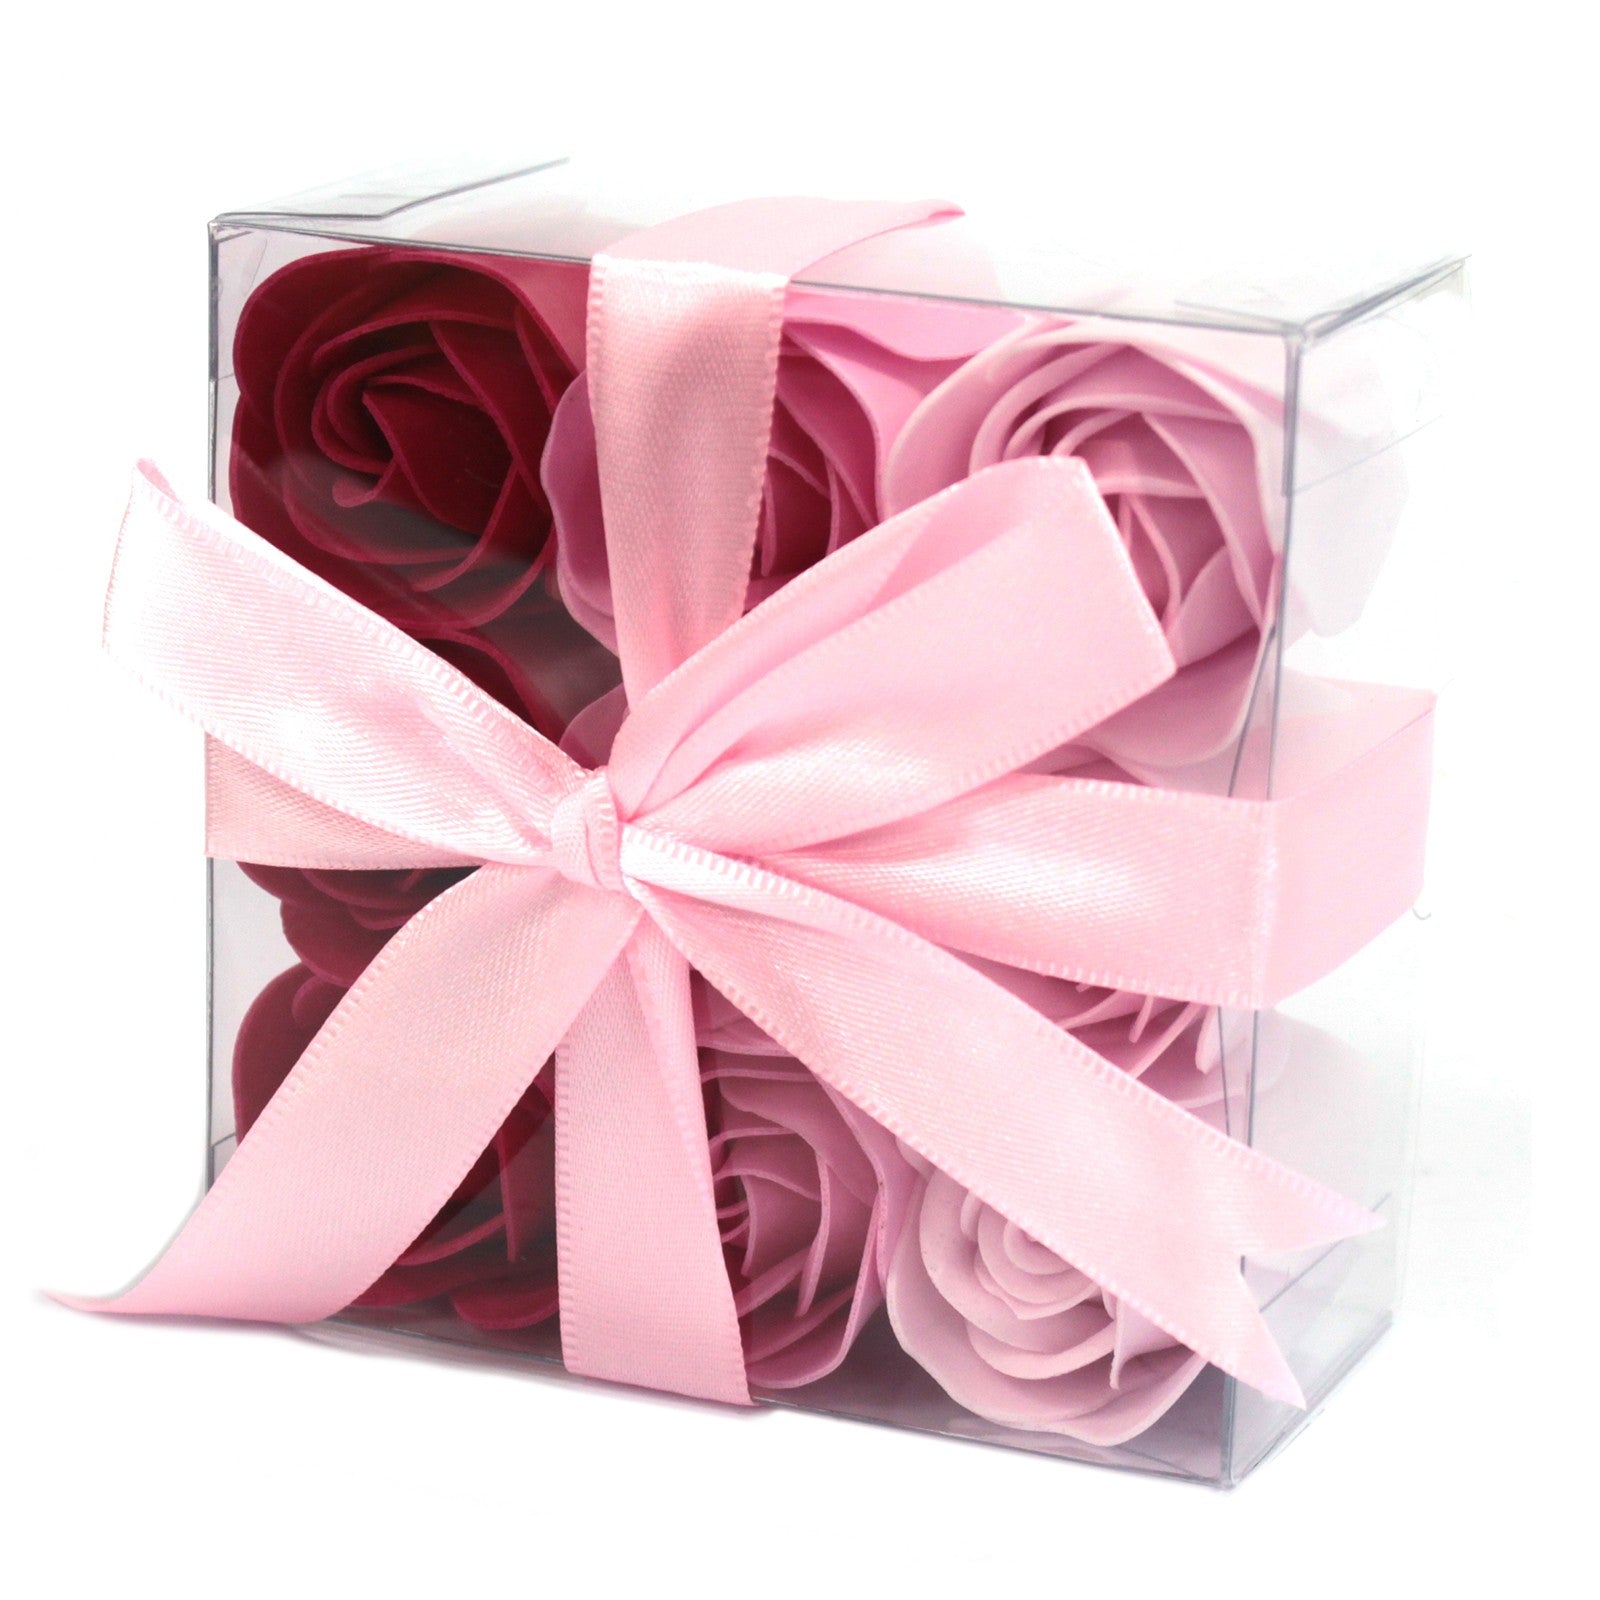 Soap Flowers - Set of 9 Pink Roses